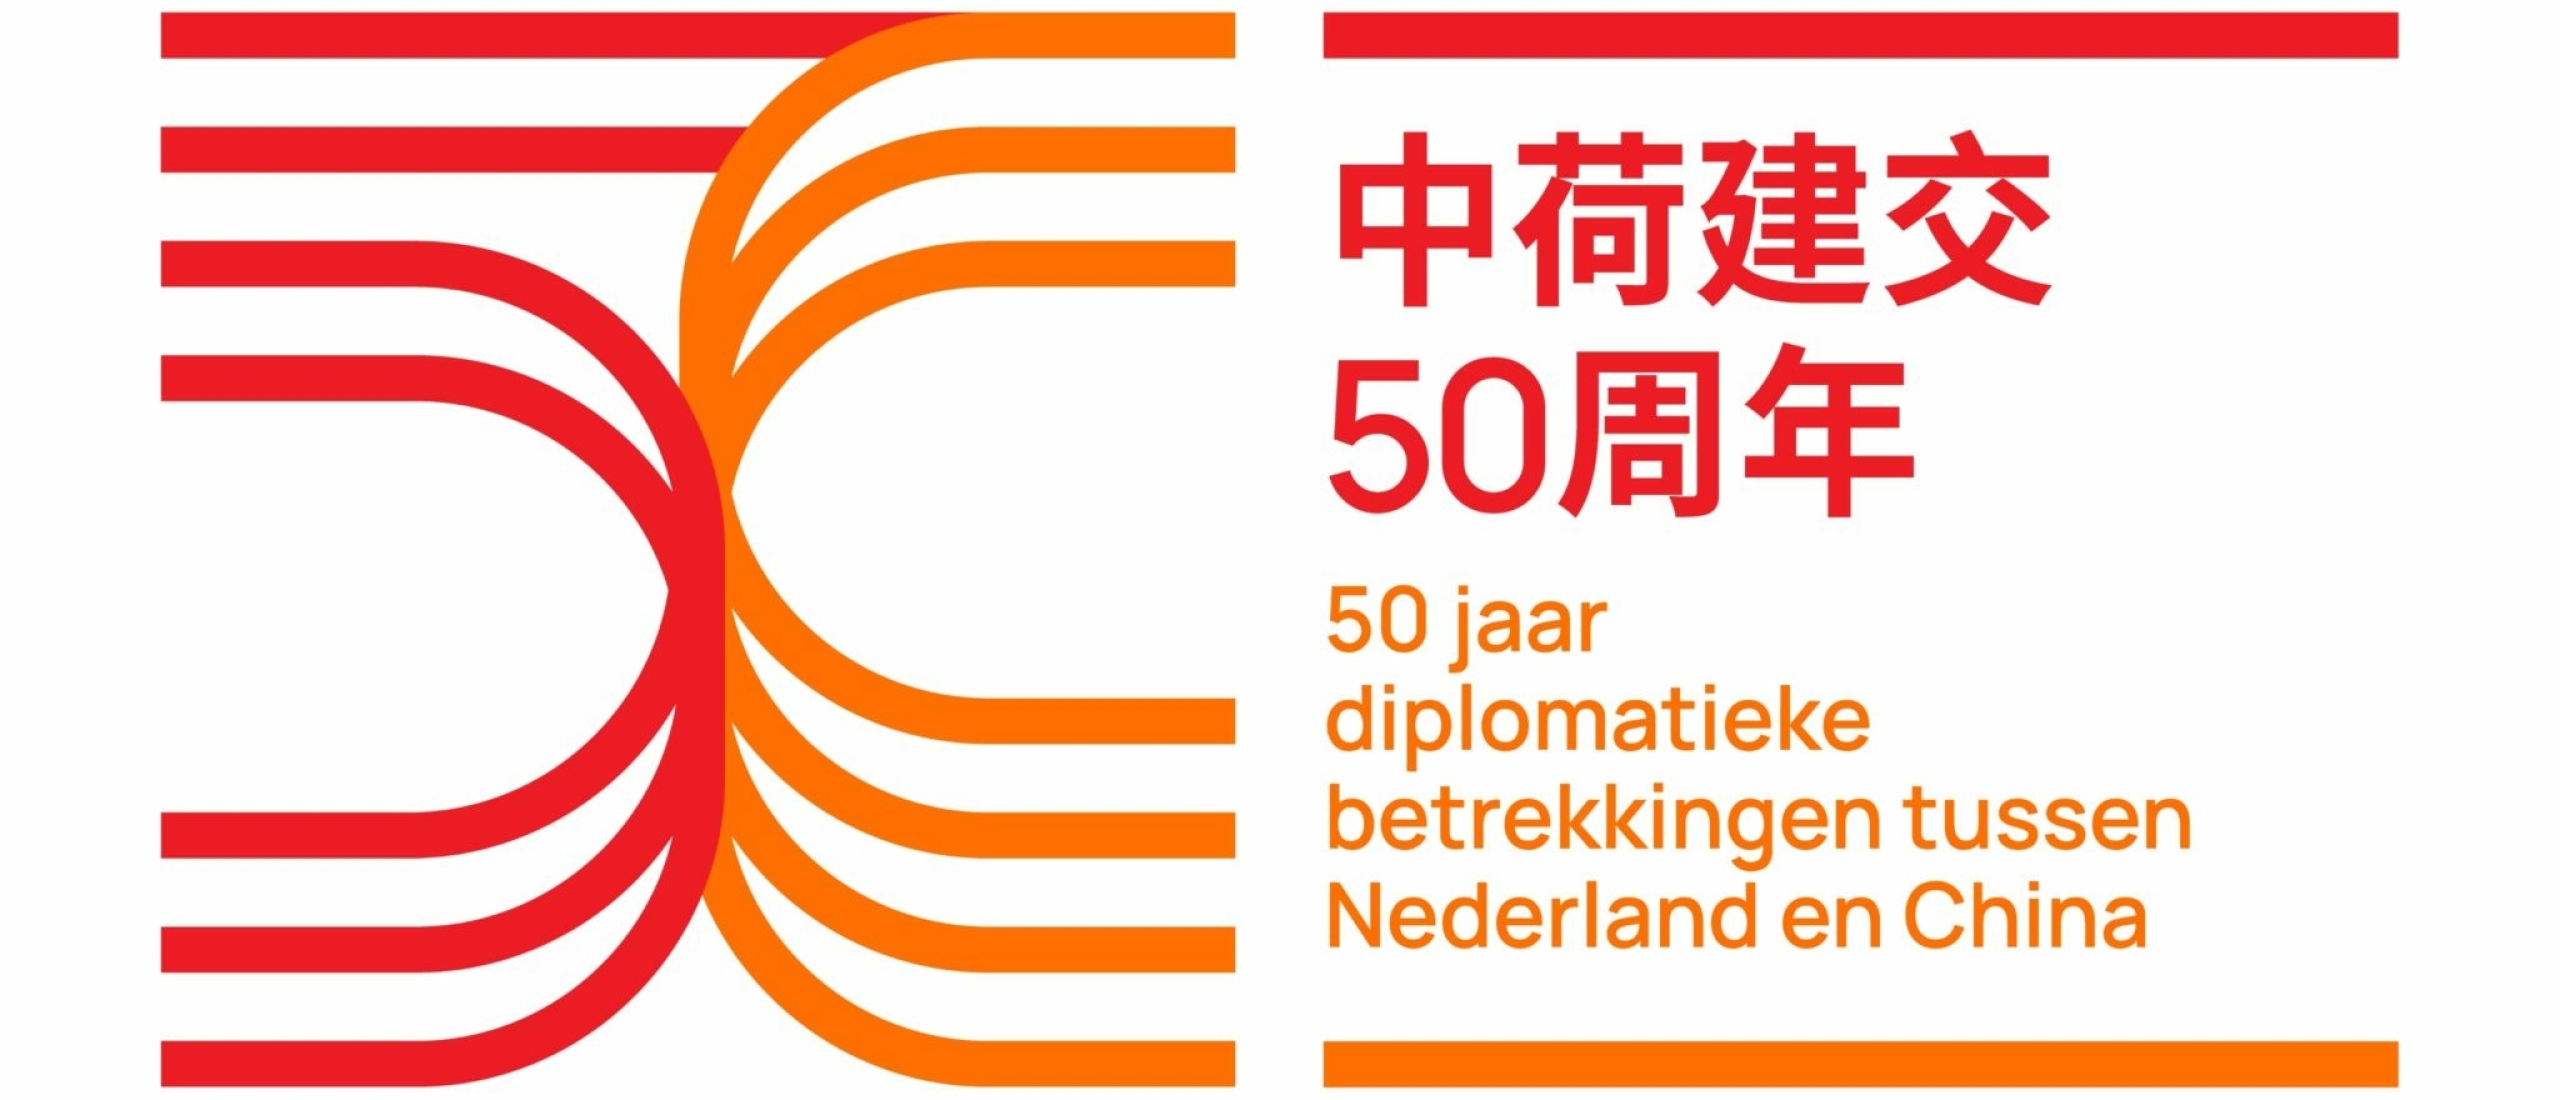 The 50th anniversary diplomatic relations between China and the Netherlands